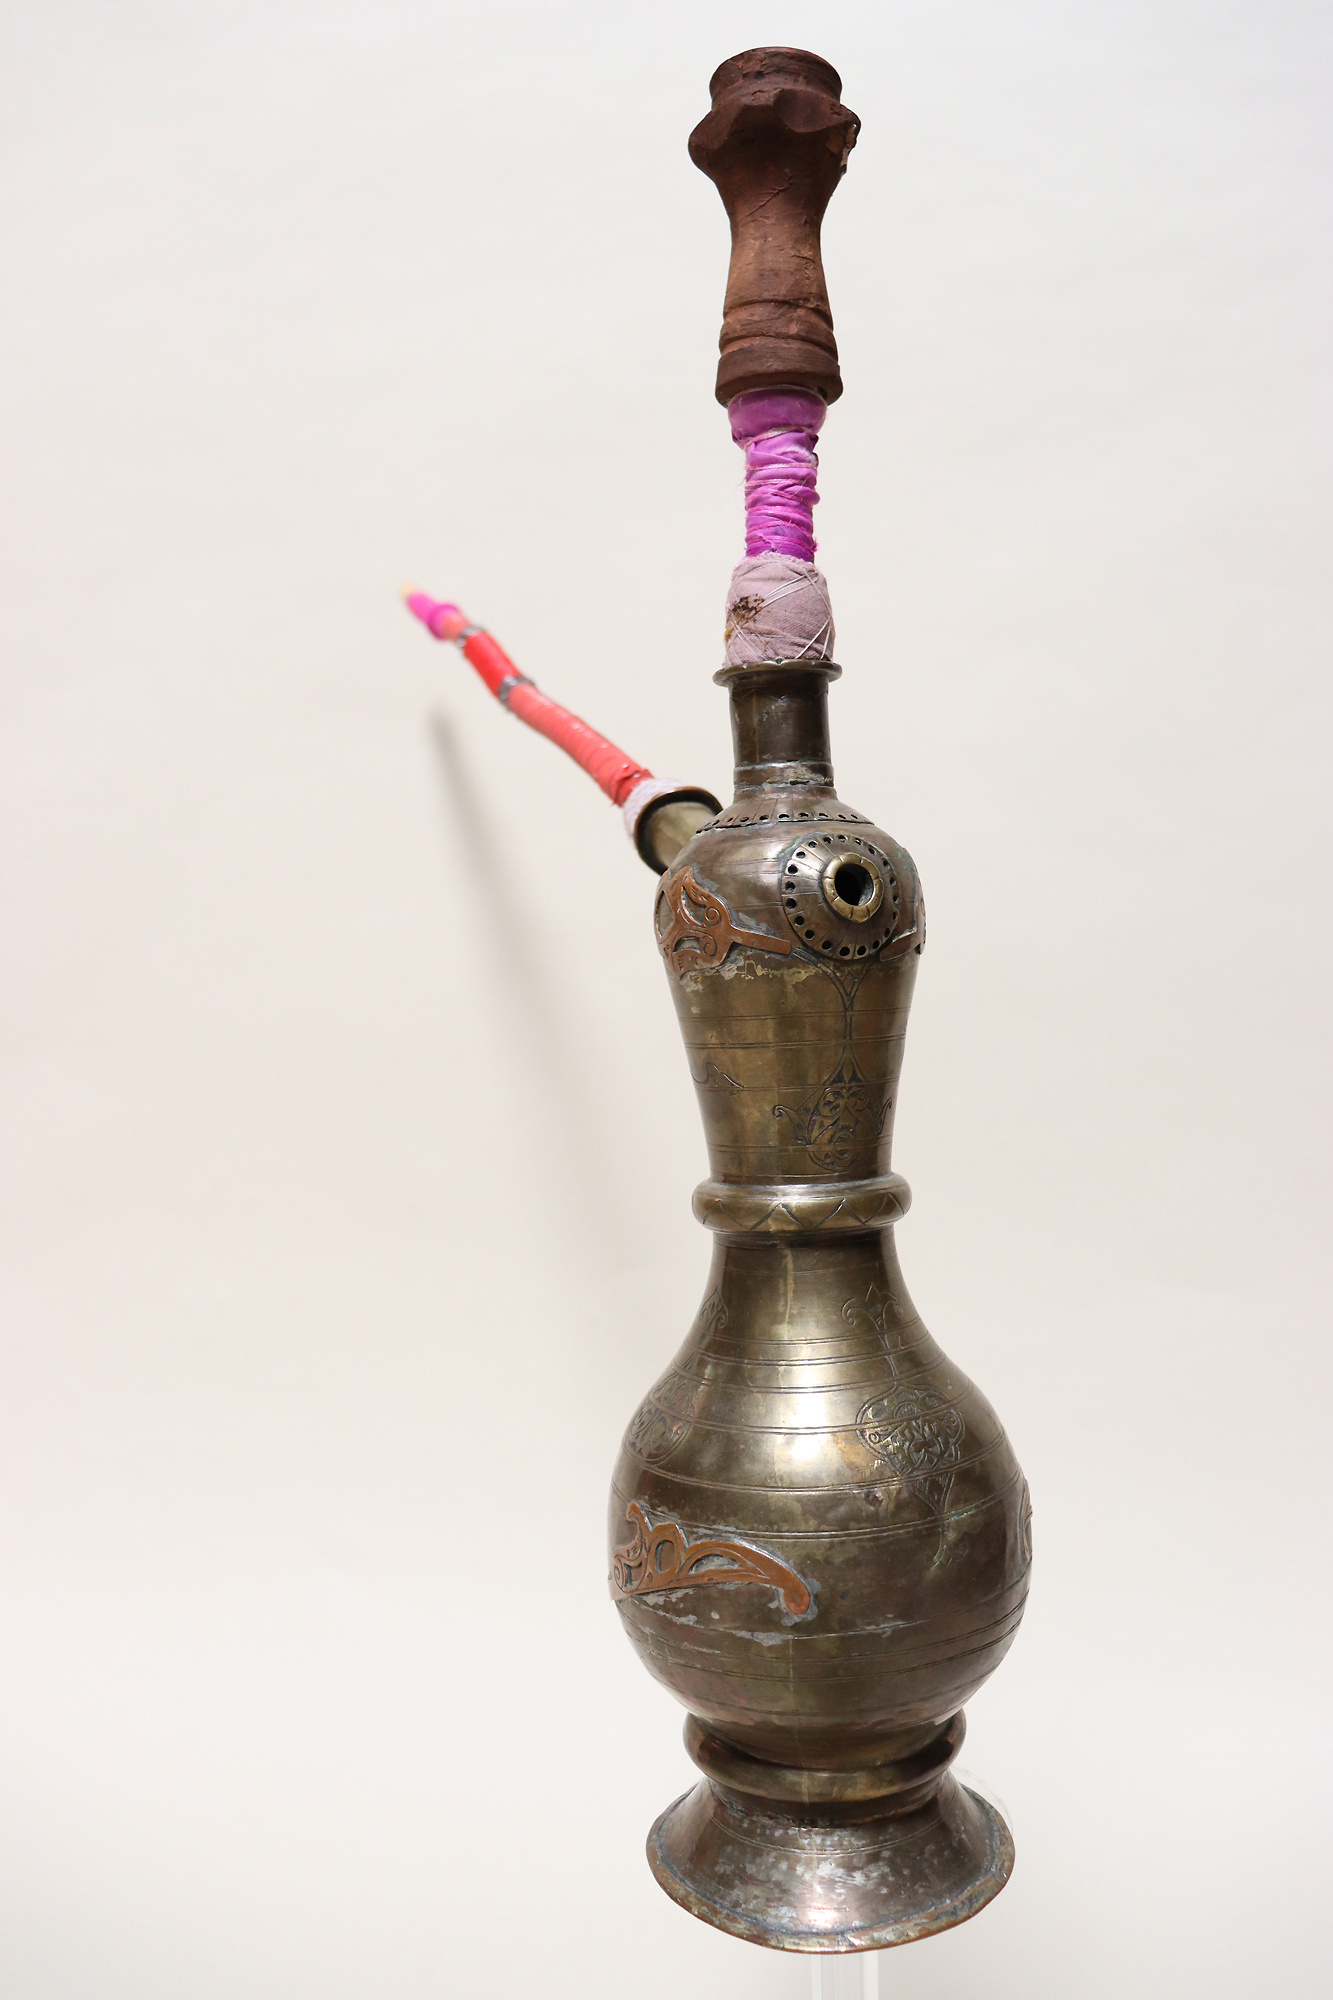 Antique Engraved Brass Hookah Shisha hubble-bubble from Afghanistan No:23/19